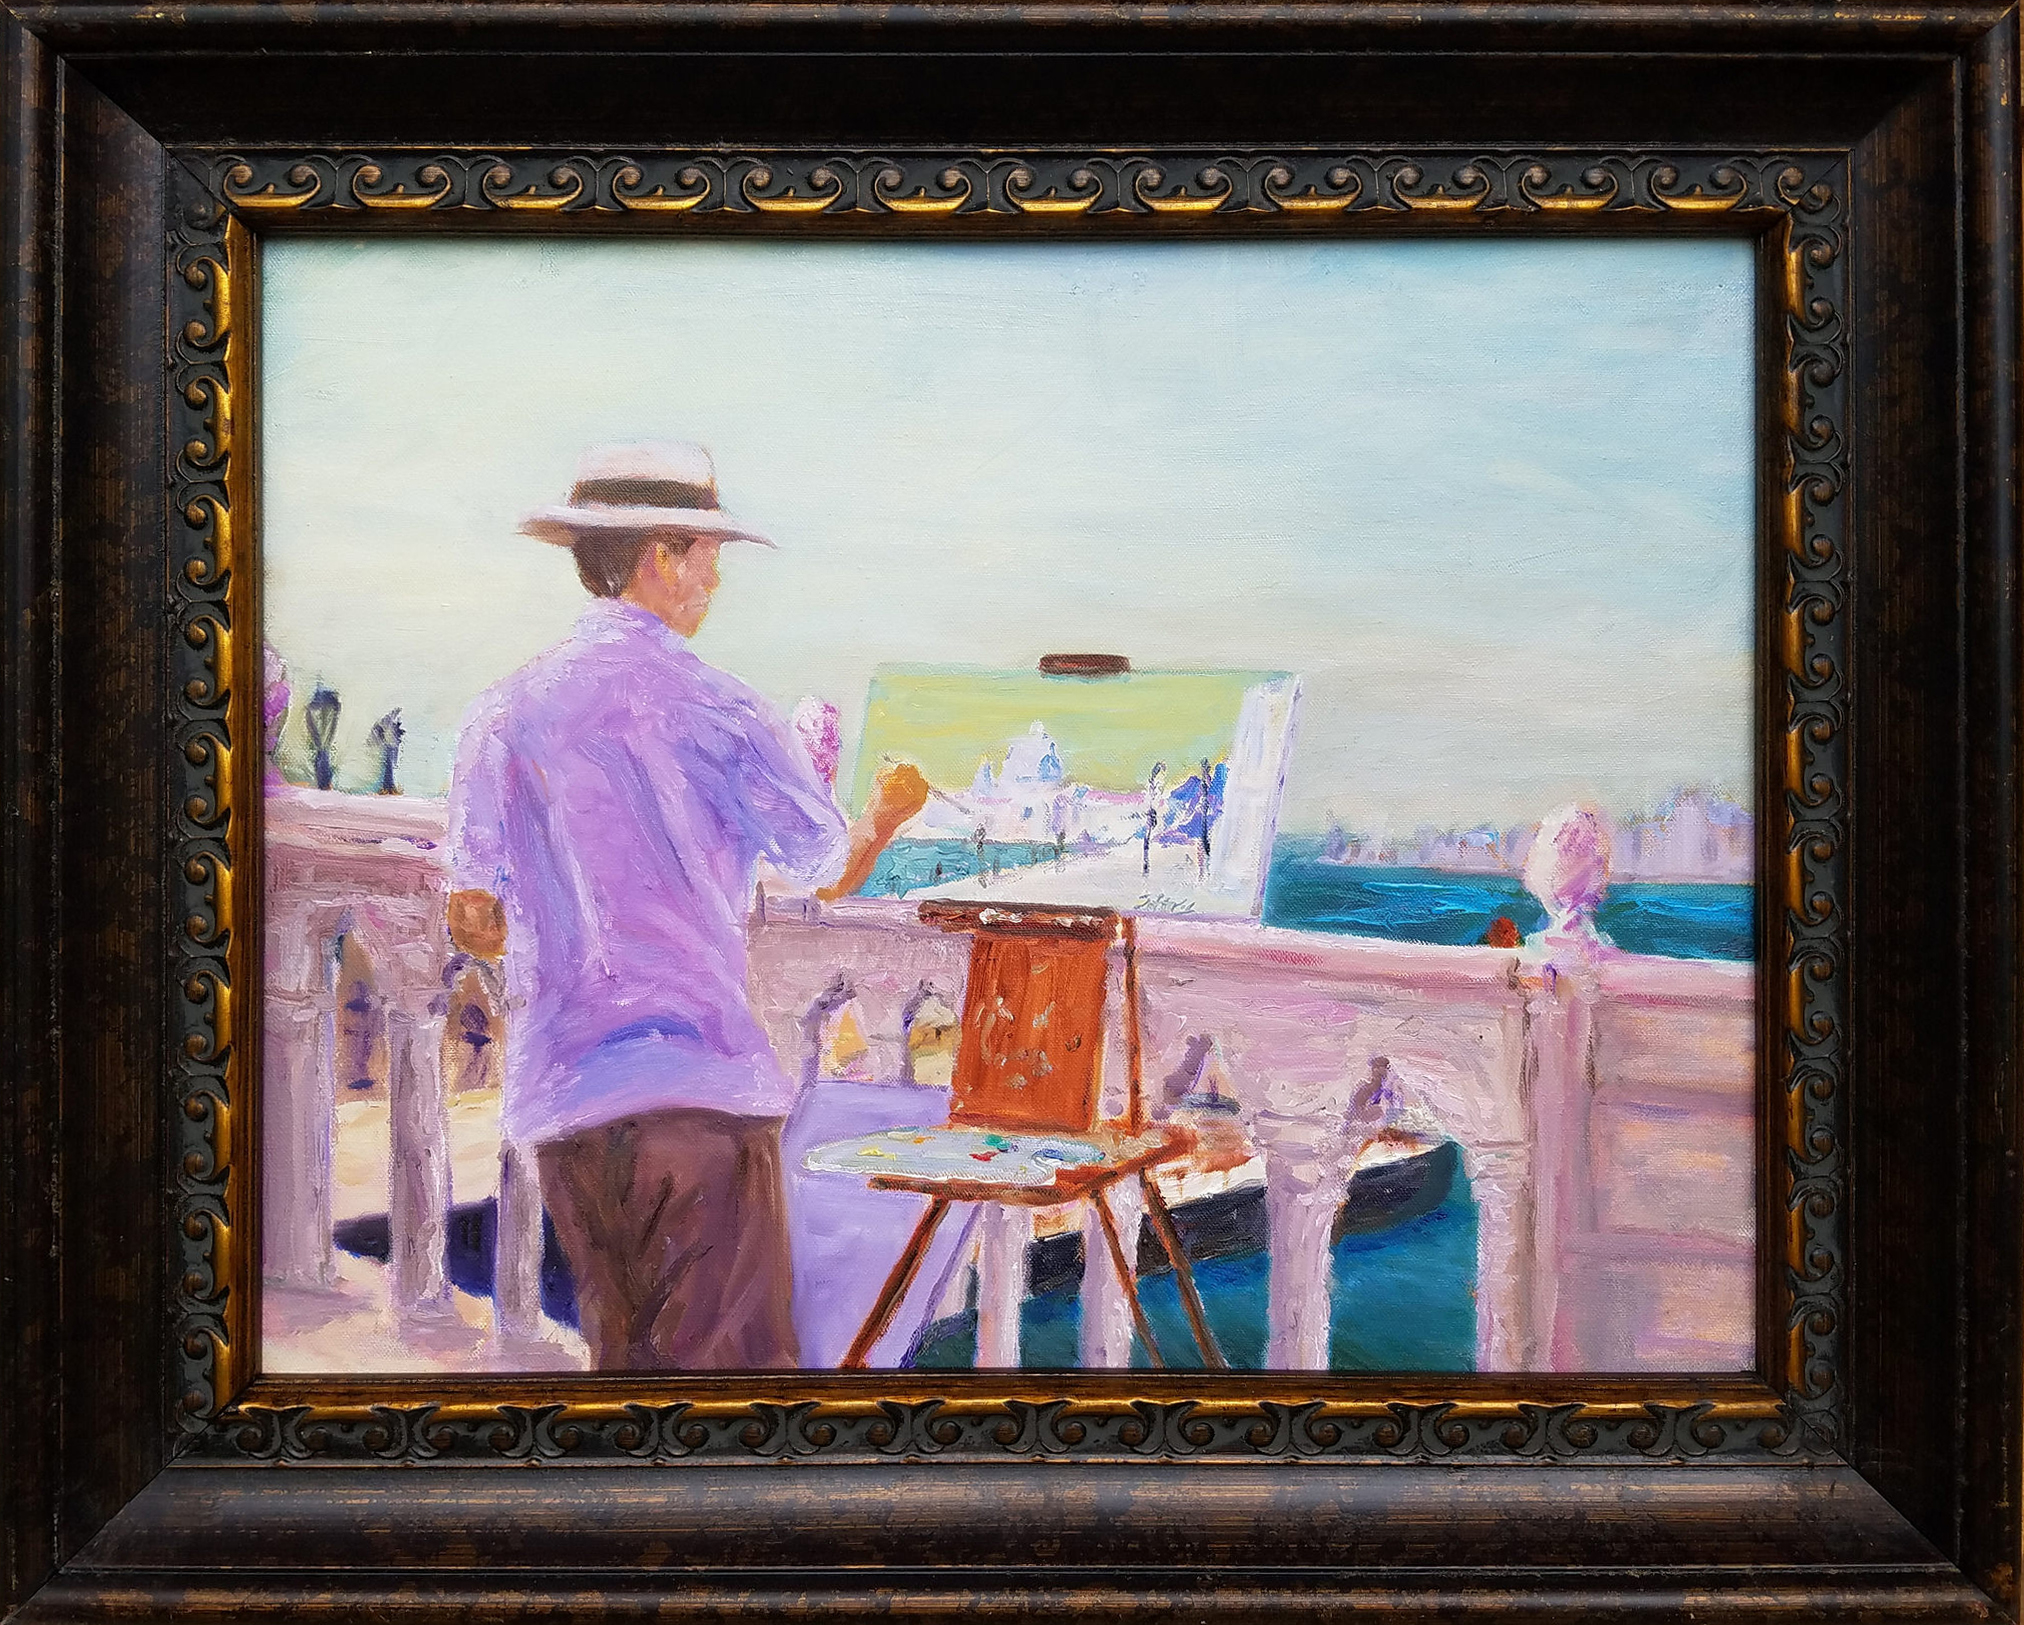 Painter Painting in Venice 